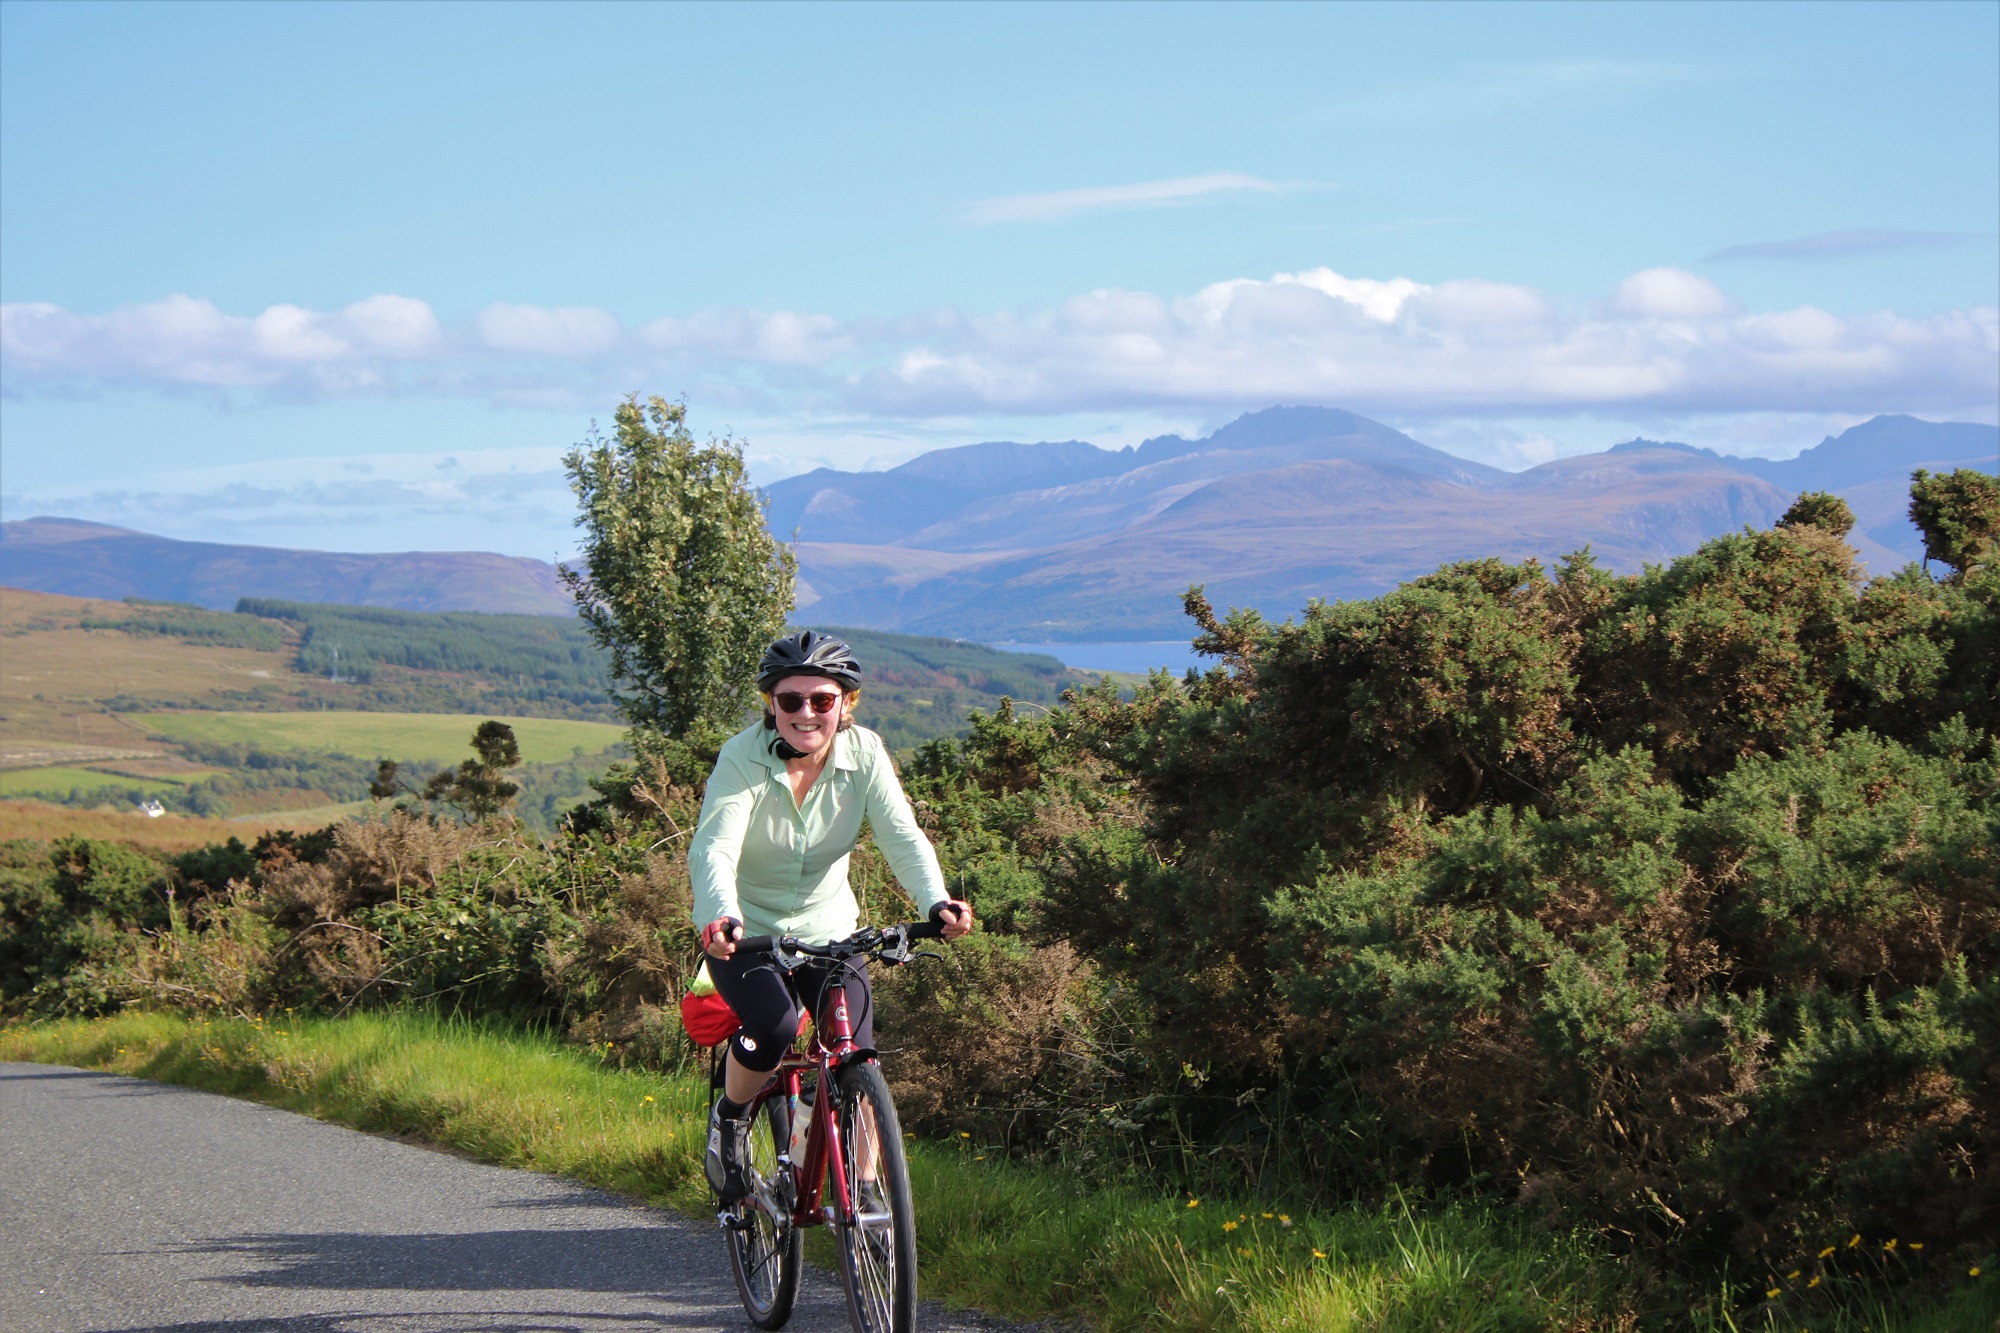 Photos from our Highlands and Islands Cycling Holiday